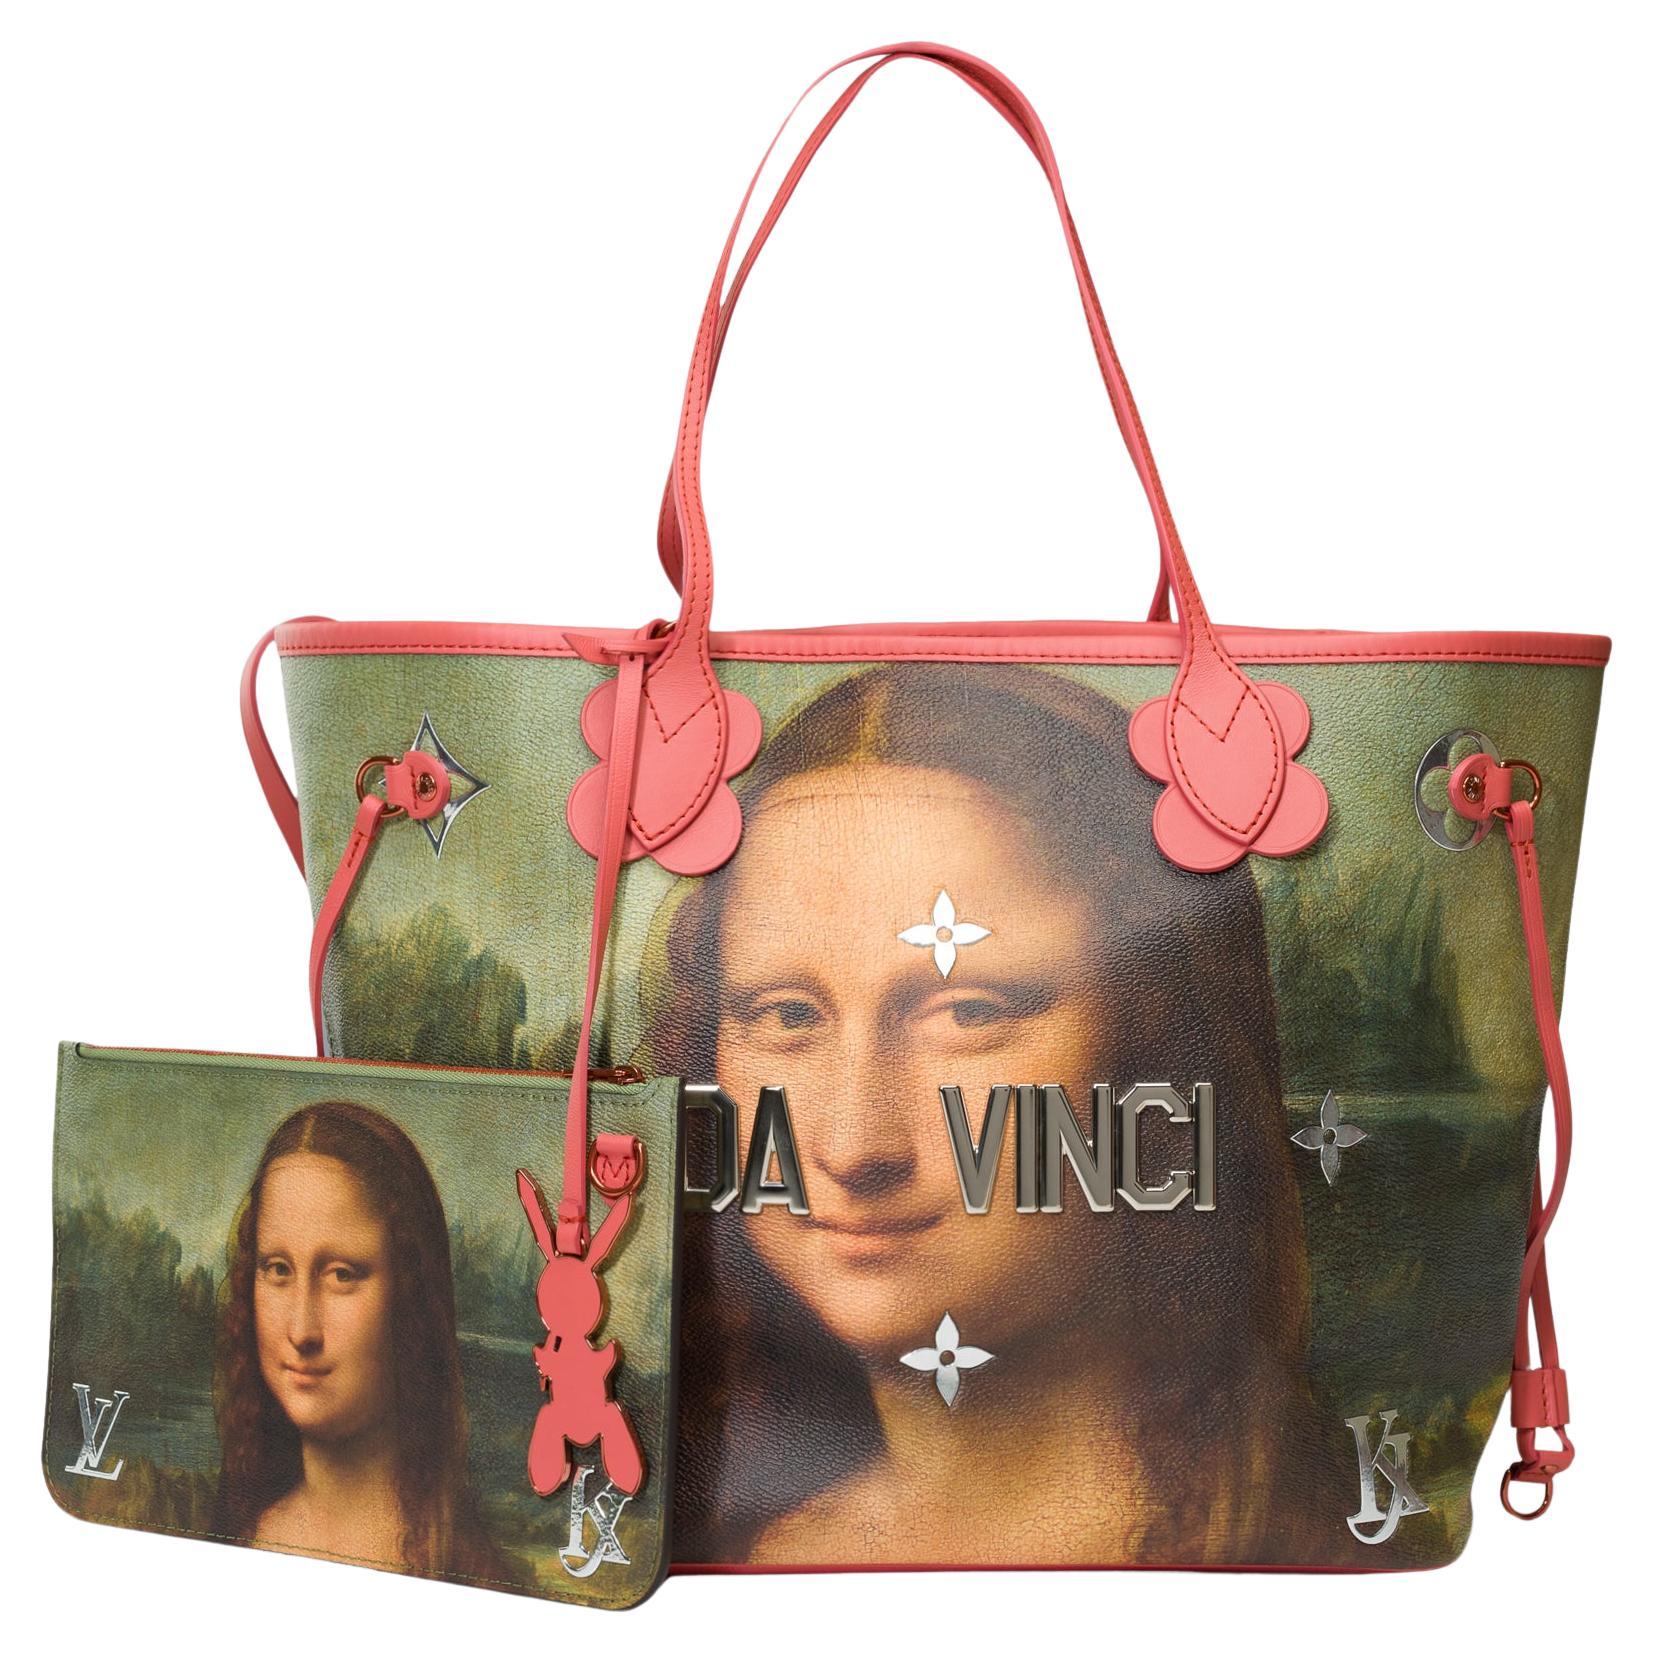 Masters Koons Da Vinci Collector Louis Vuitton Neverfull Tote bag in canvas For Sale